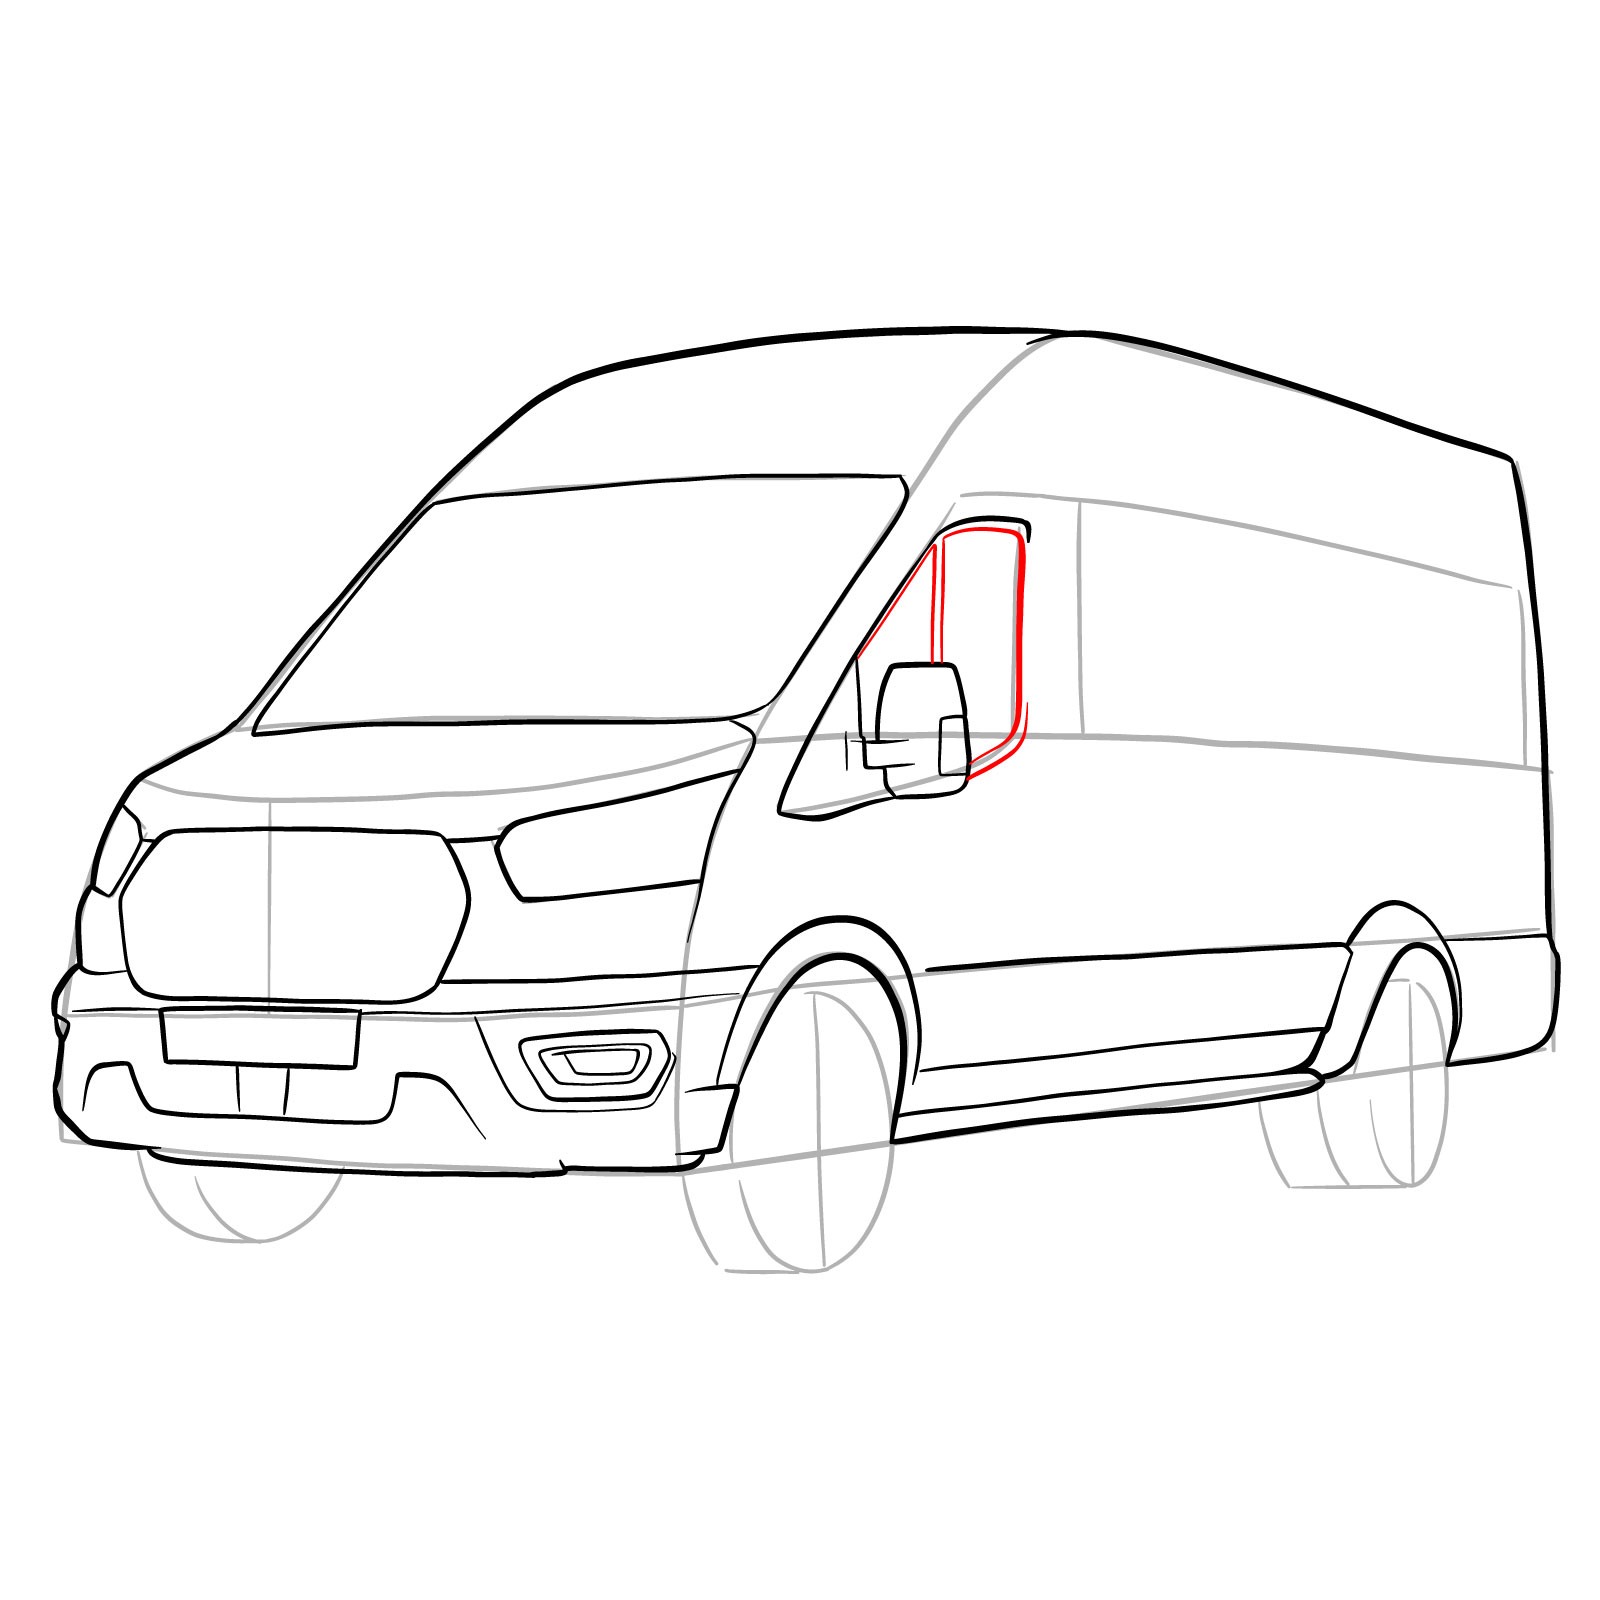 How to draw 2020 Ford Transit - step 22